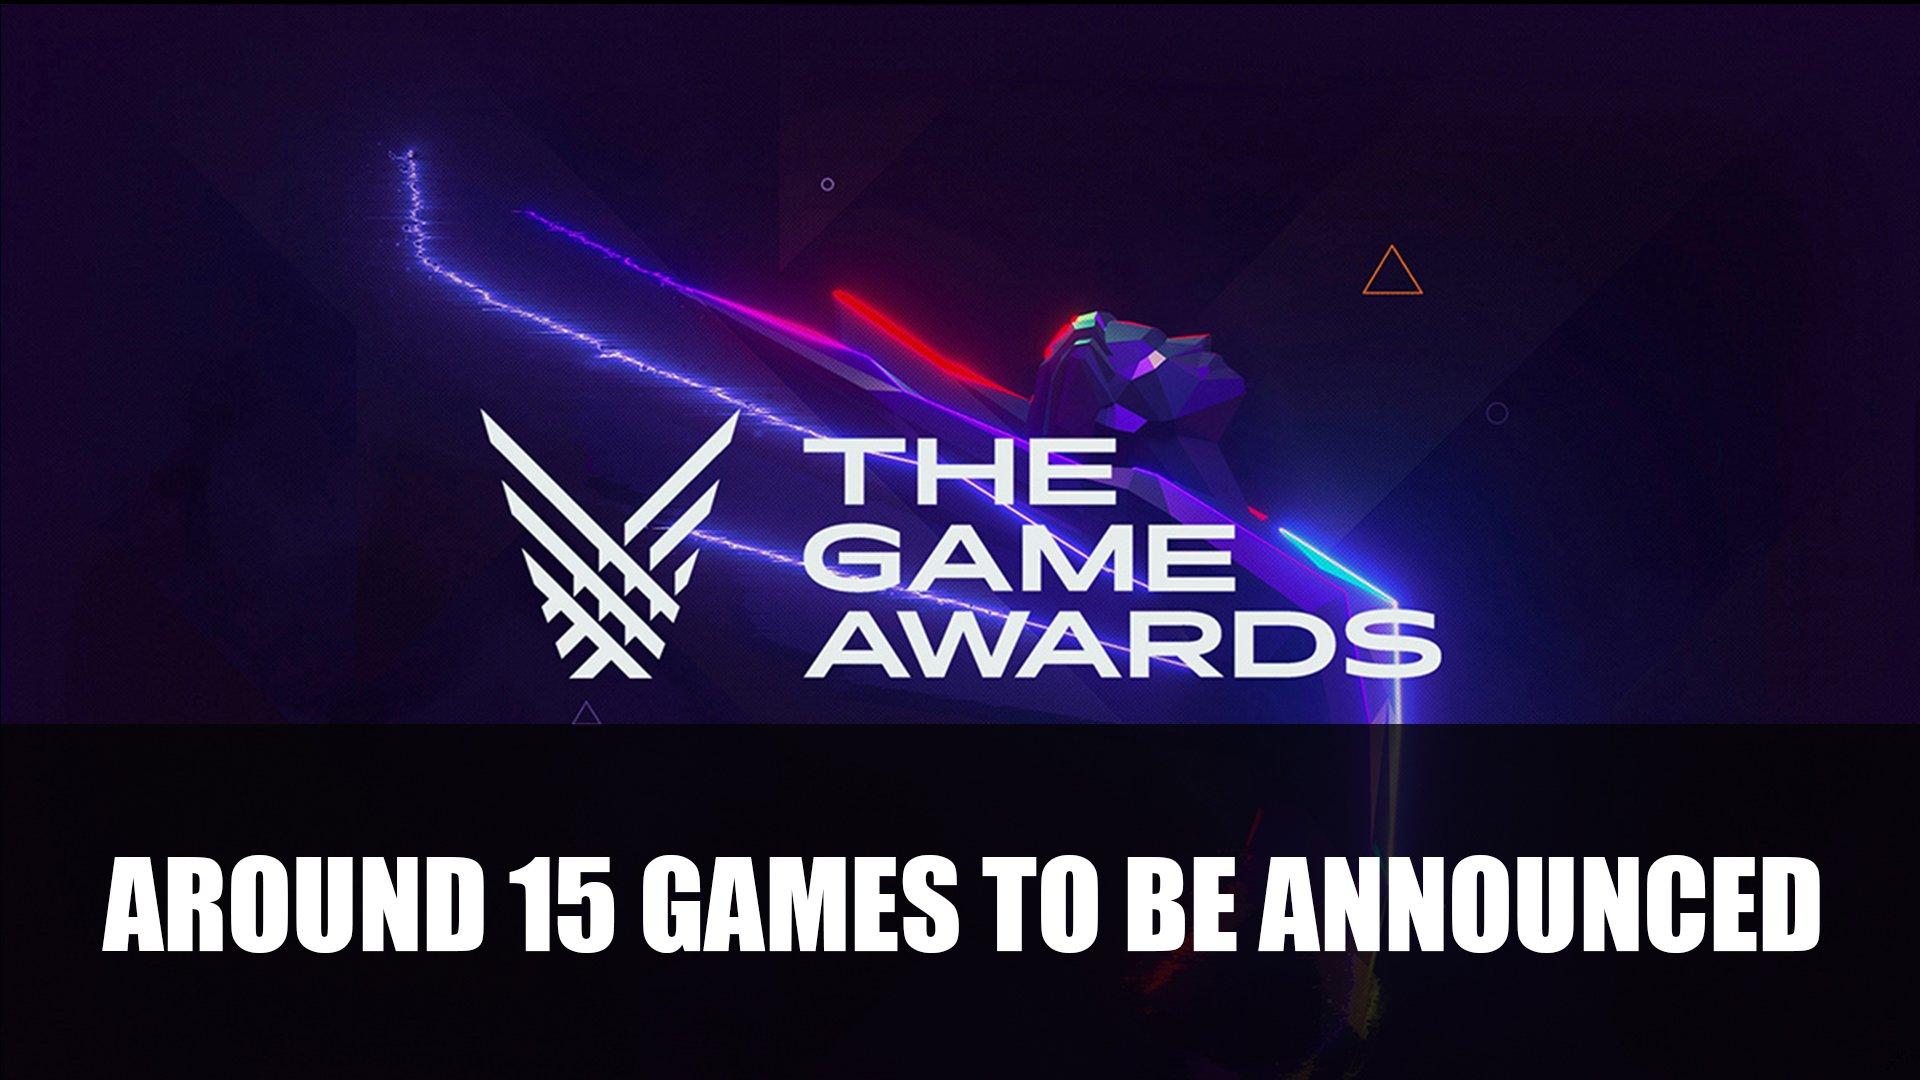 The Game Awards 2019 Will Have Around 15 New Games Announced